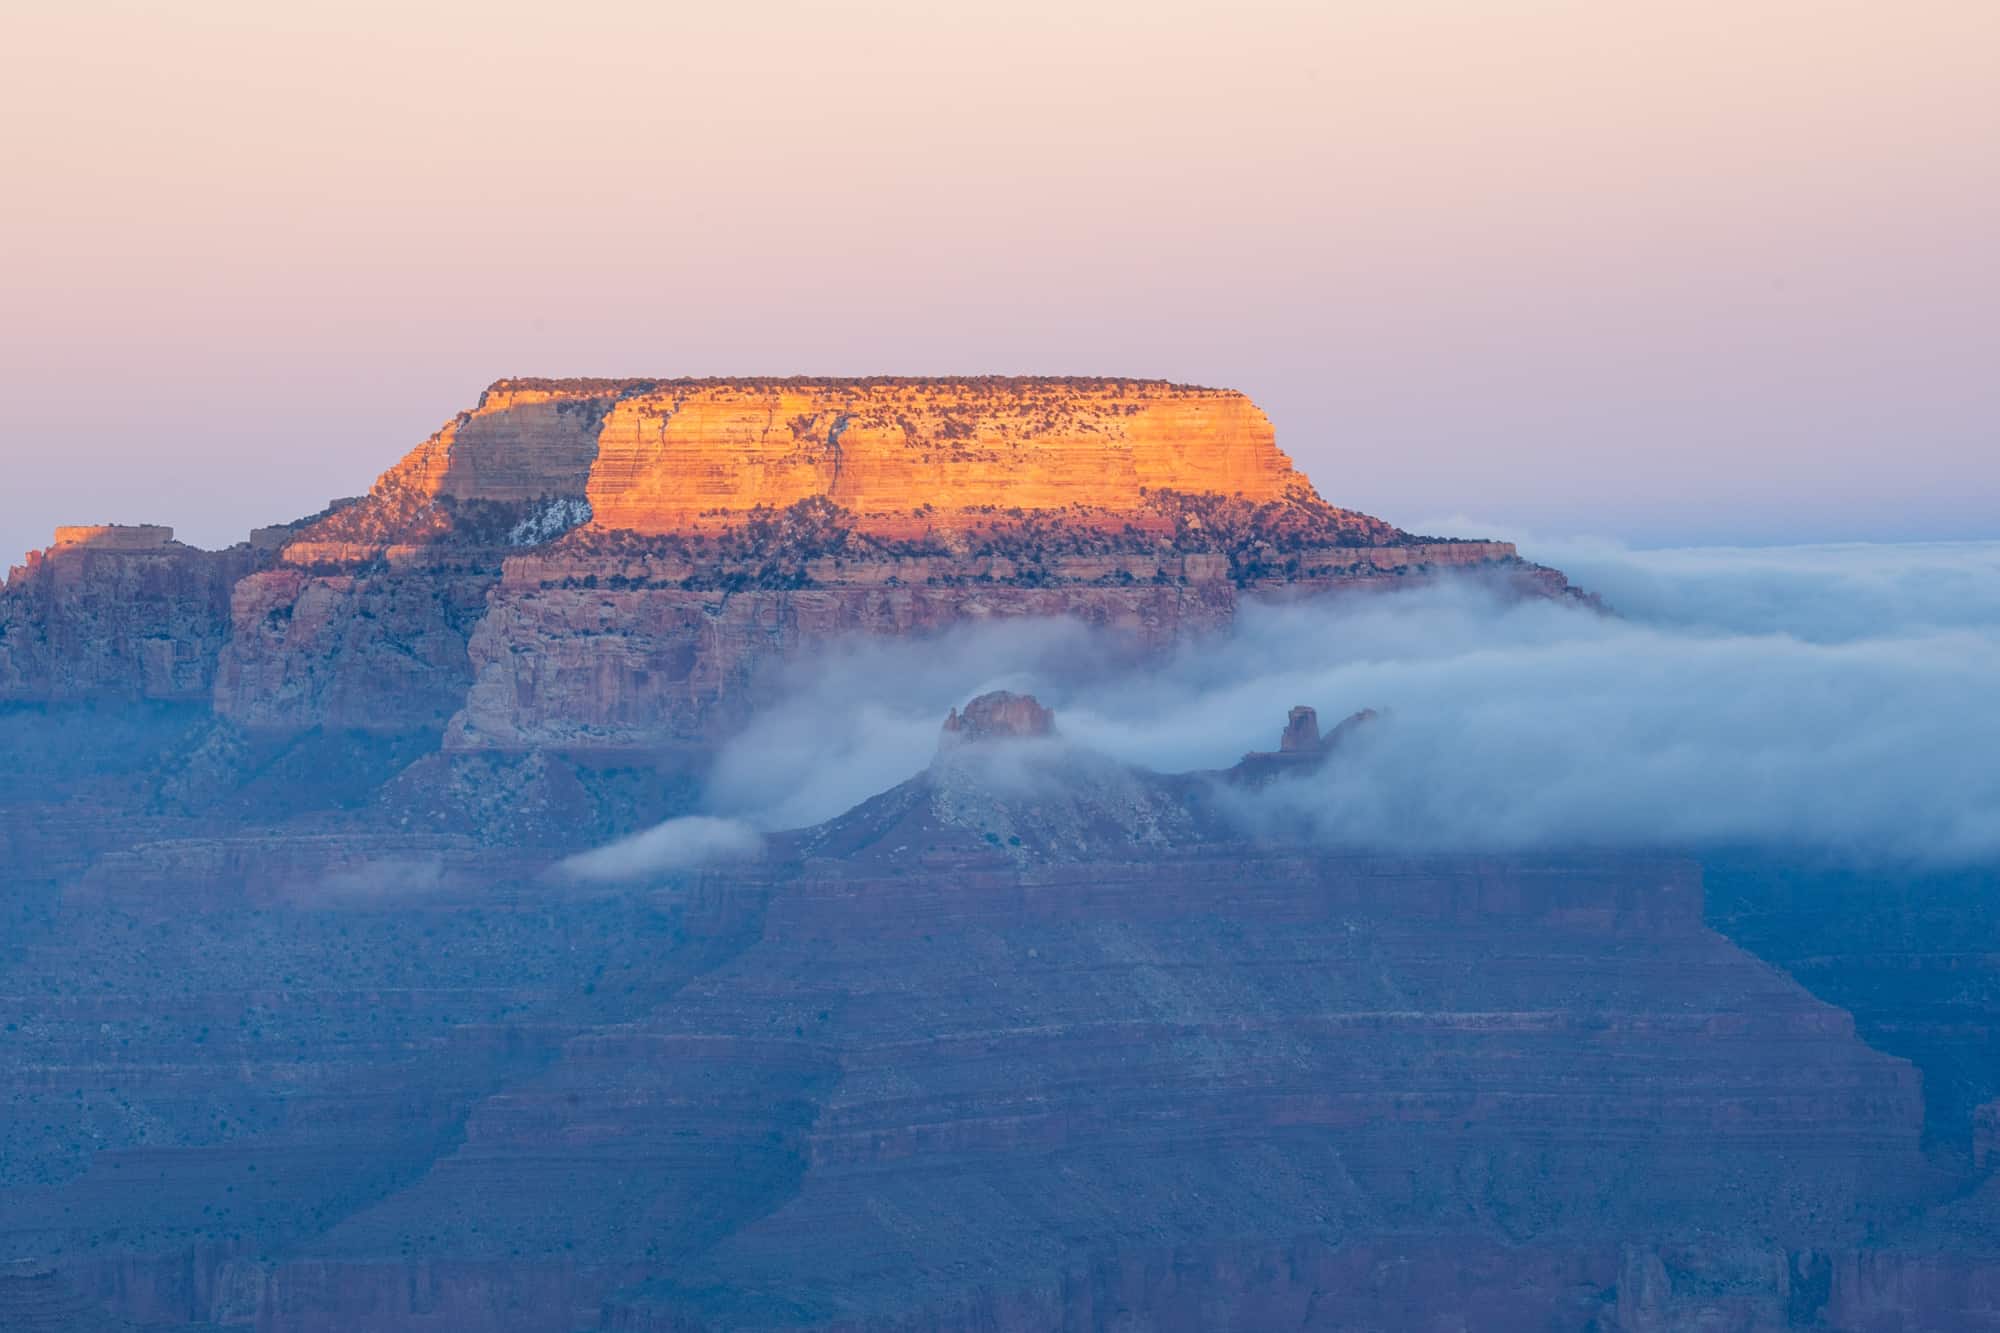 the grand canyon at sunset with some low lying clouds, beautiful sunsets like this can be seen on the best grand canyon tours from sedona